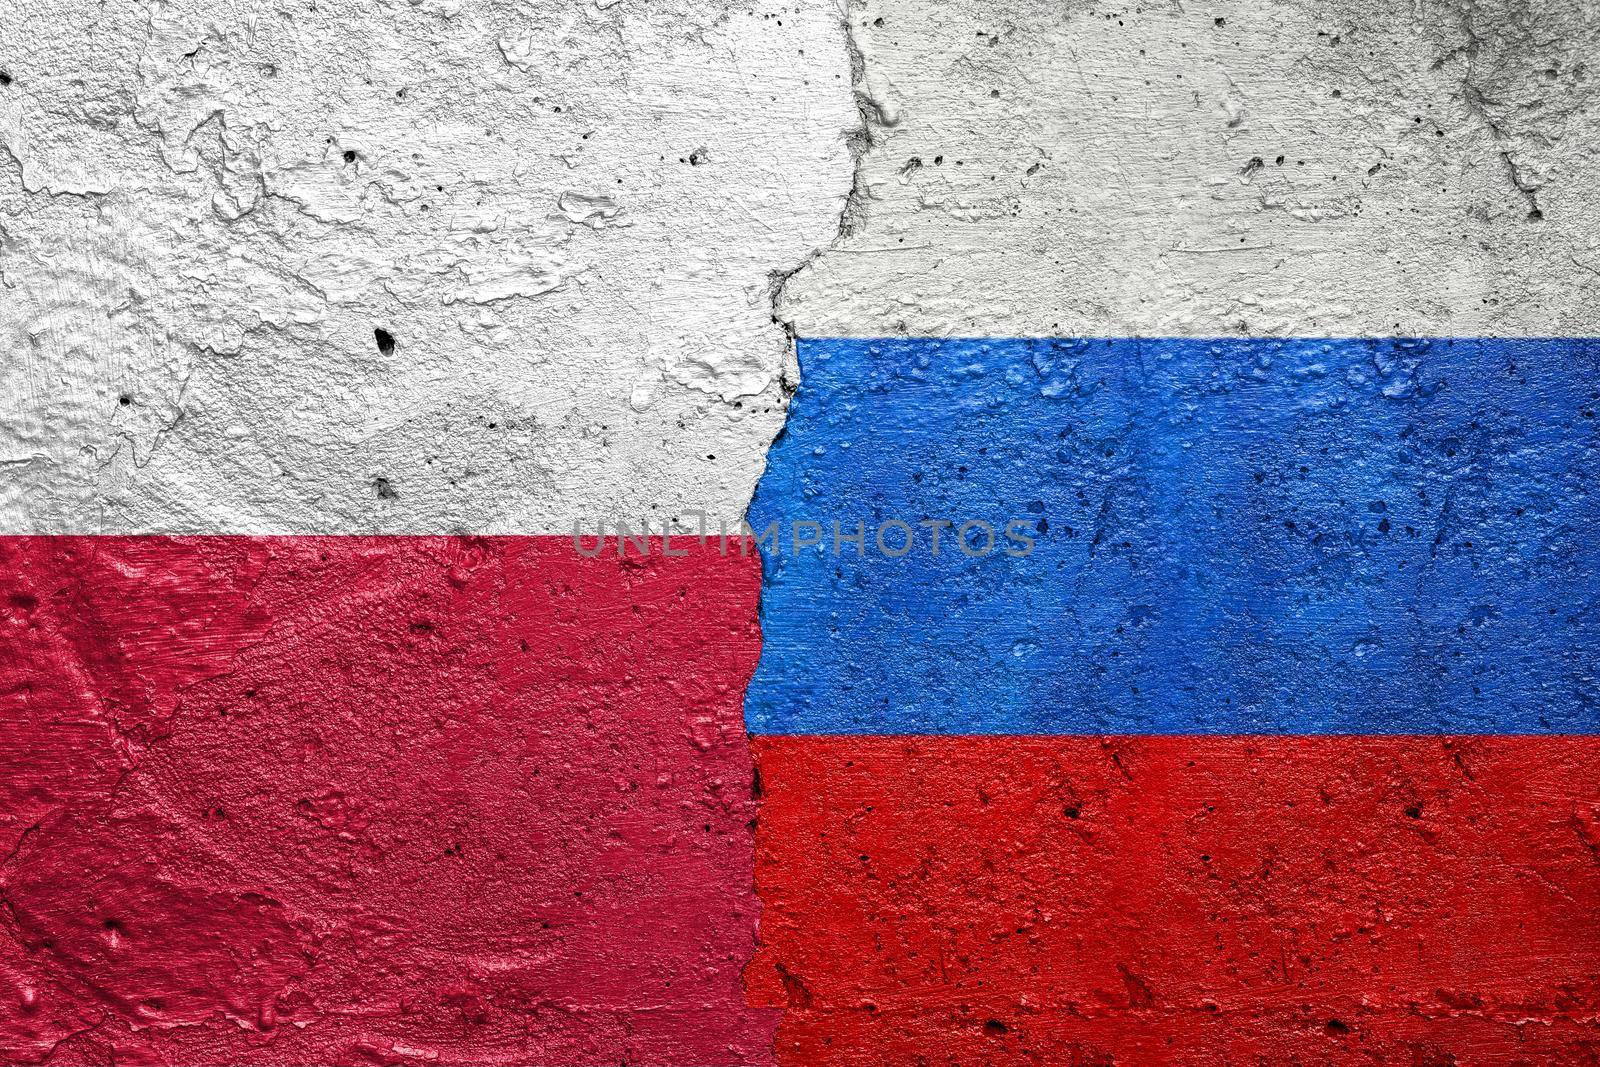 Poland and Russia - Cracked concrete wall painted with a Polish flag on the left and a Russian flag on the right stock photo by adamr